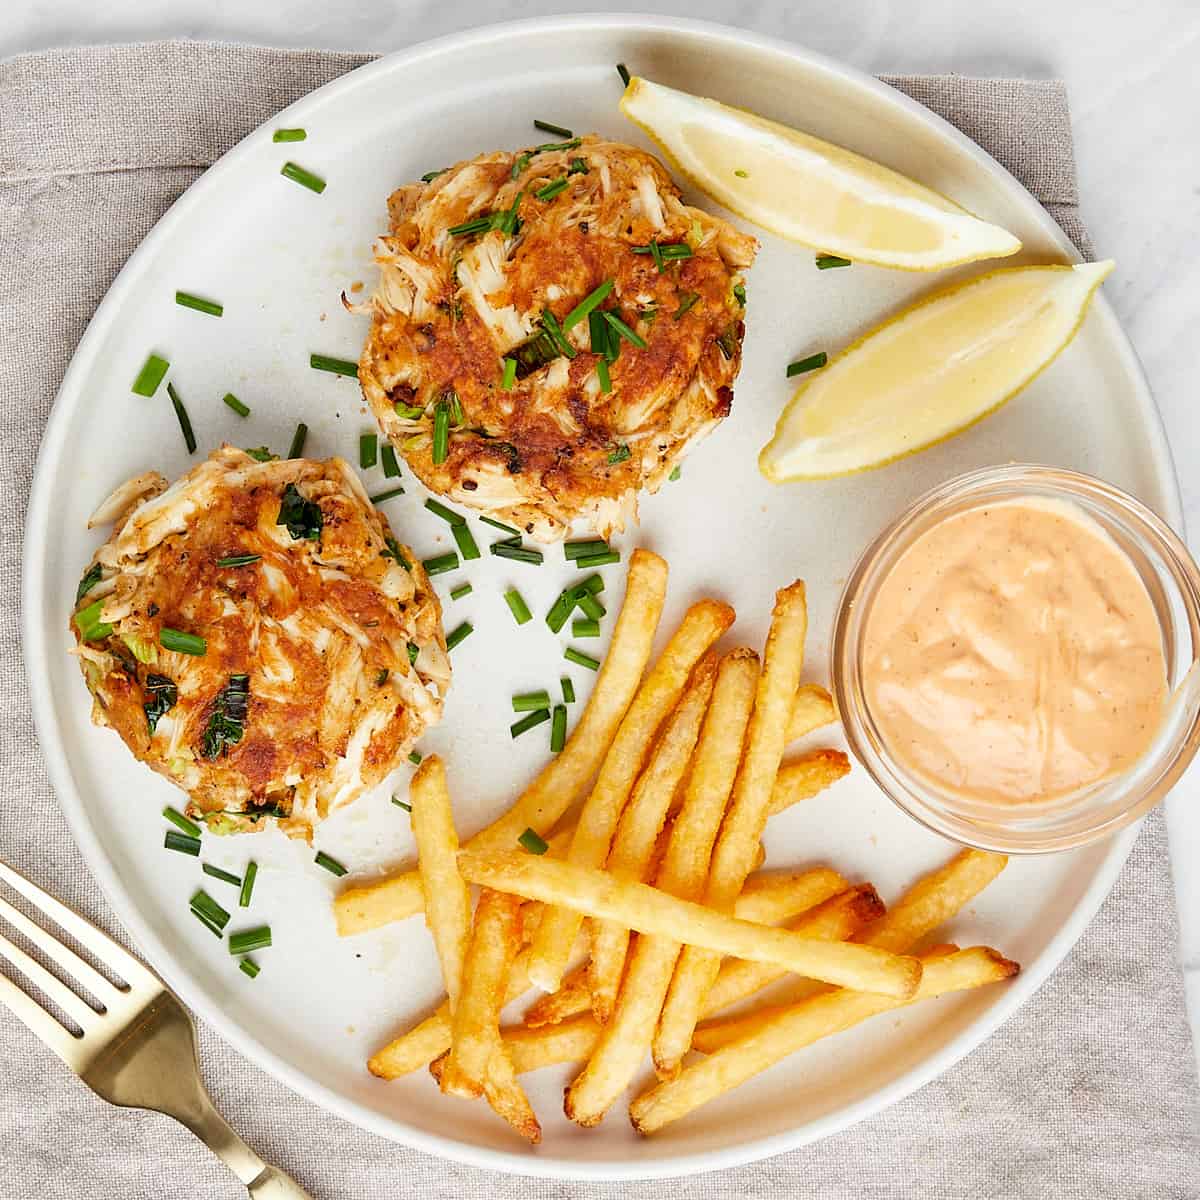 Maryland Style Crab Cakes with Spicy Remoulade